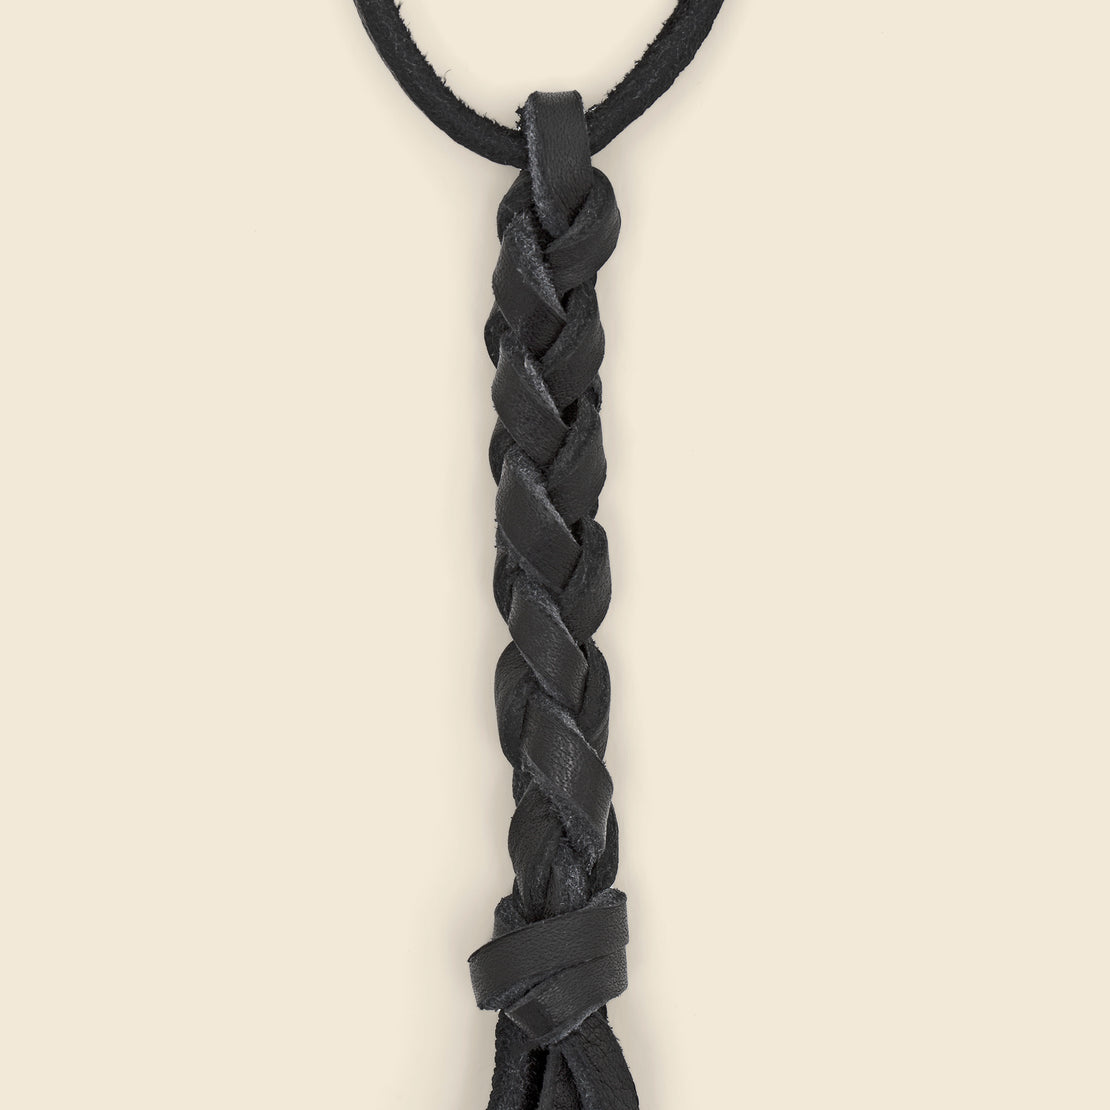 Braided Leather Necklace - Black - Yuketen - STAG Provisions - Accessories - Necklaces